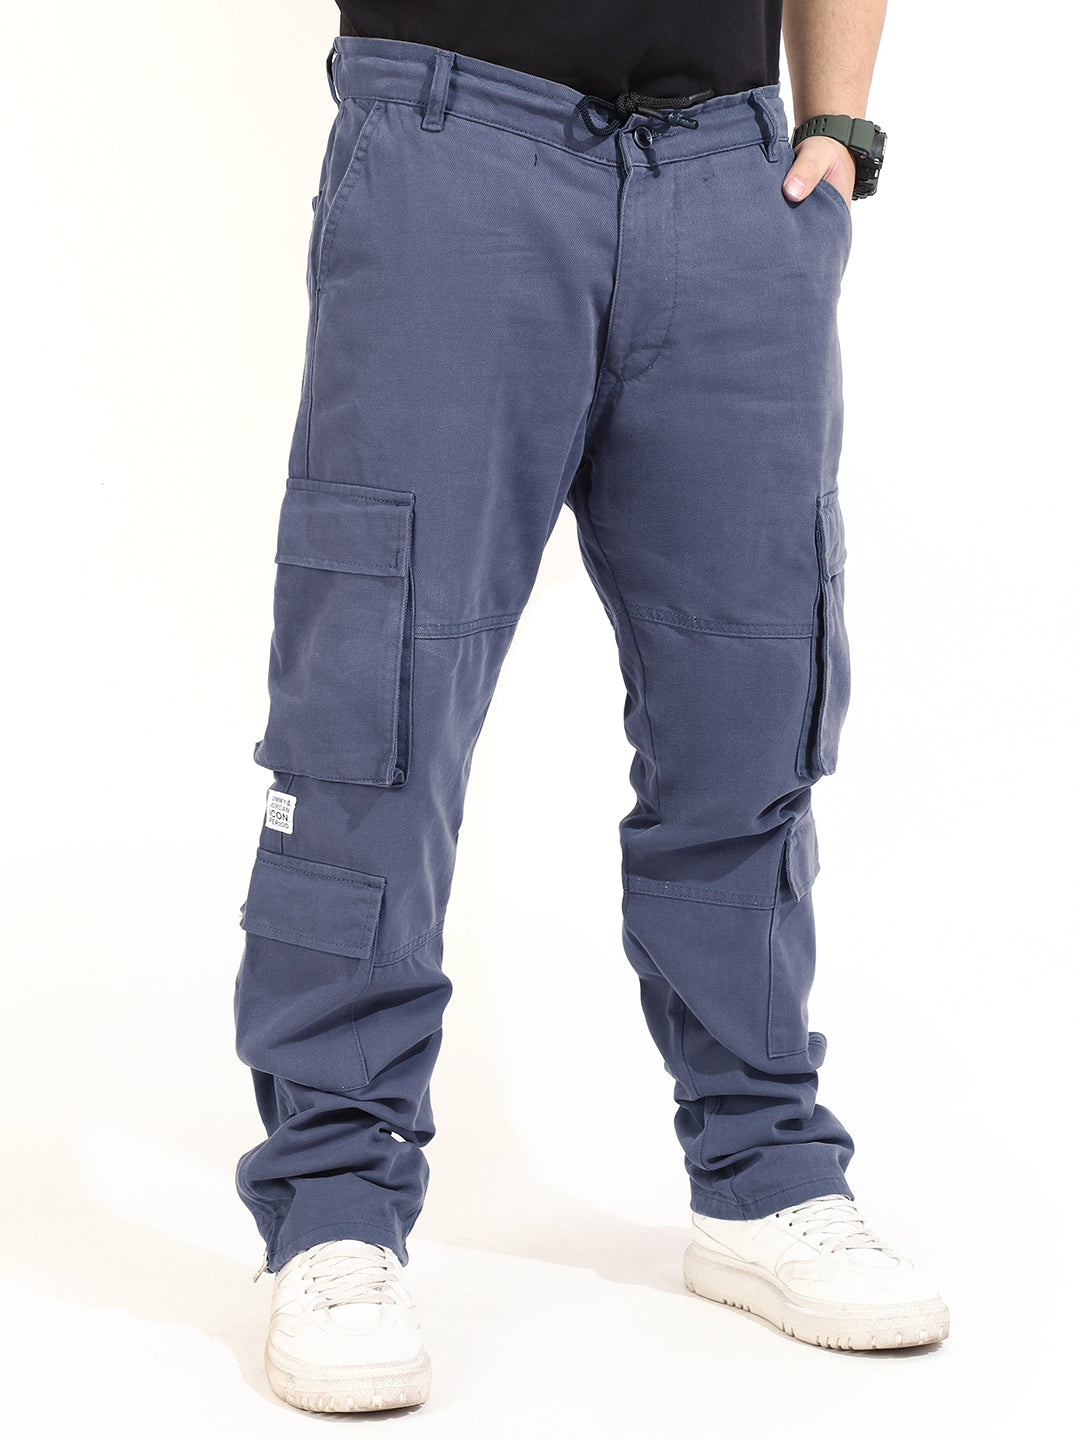 Ash Grey Cotton Drill 8 pocket Baggy Fit Cargo